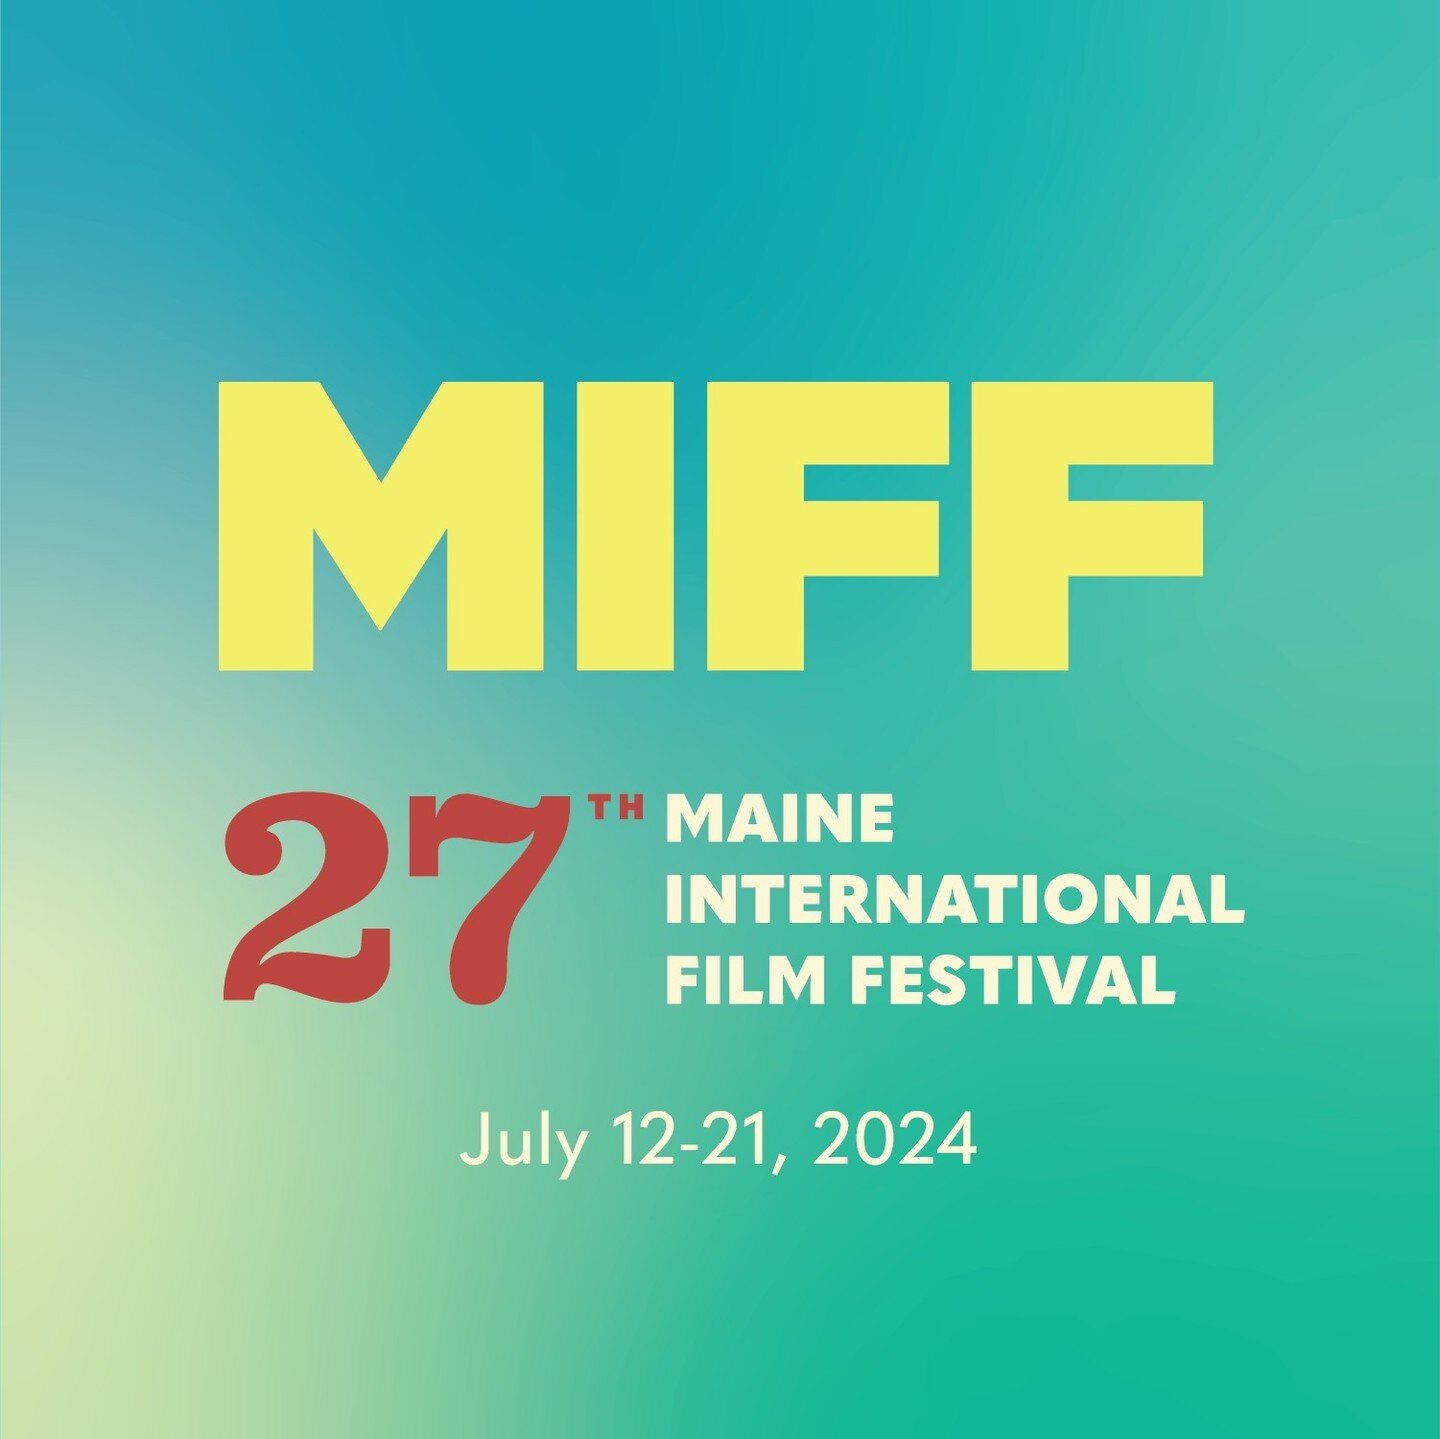 Just Announced: Passes and Packages to MIFF27 are now on sale! 🌲 🎥 

With 100 films to see across 10 days in July, secure your tickets ahead of time with the pass or package that&rsquo;s perfect for you! 
miff.org

#WatervilleMaine #WatervilleCreat